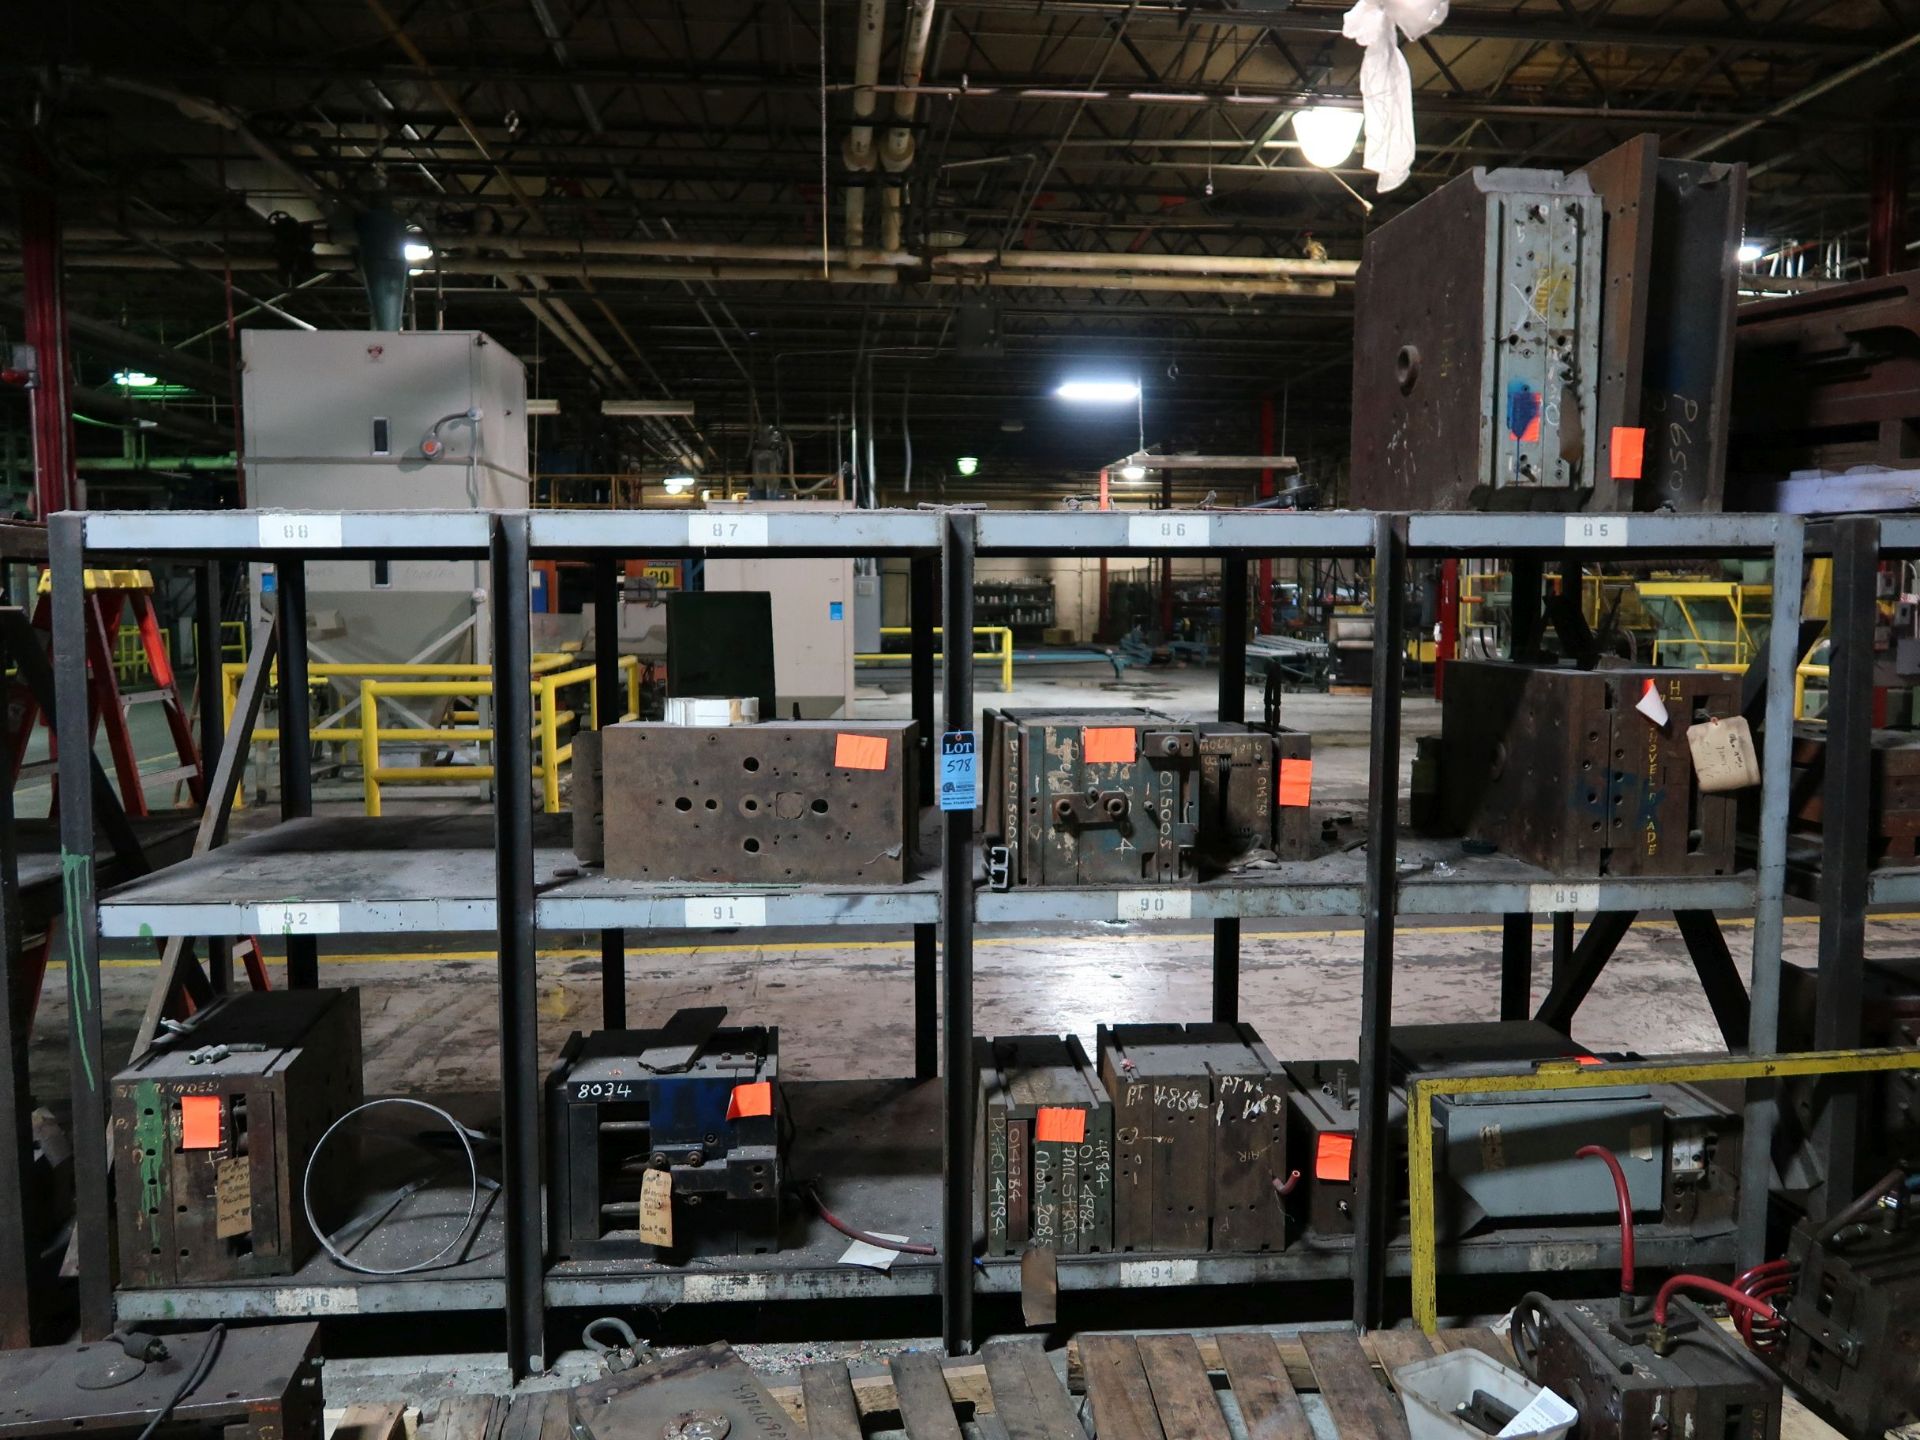 (LOT) RACK WITH (8) STEEL MOLDS - SOLD BY THE LOT